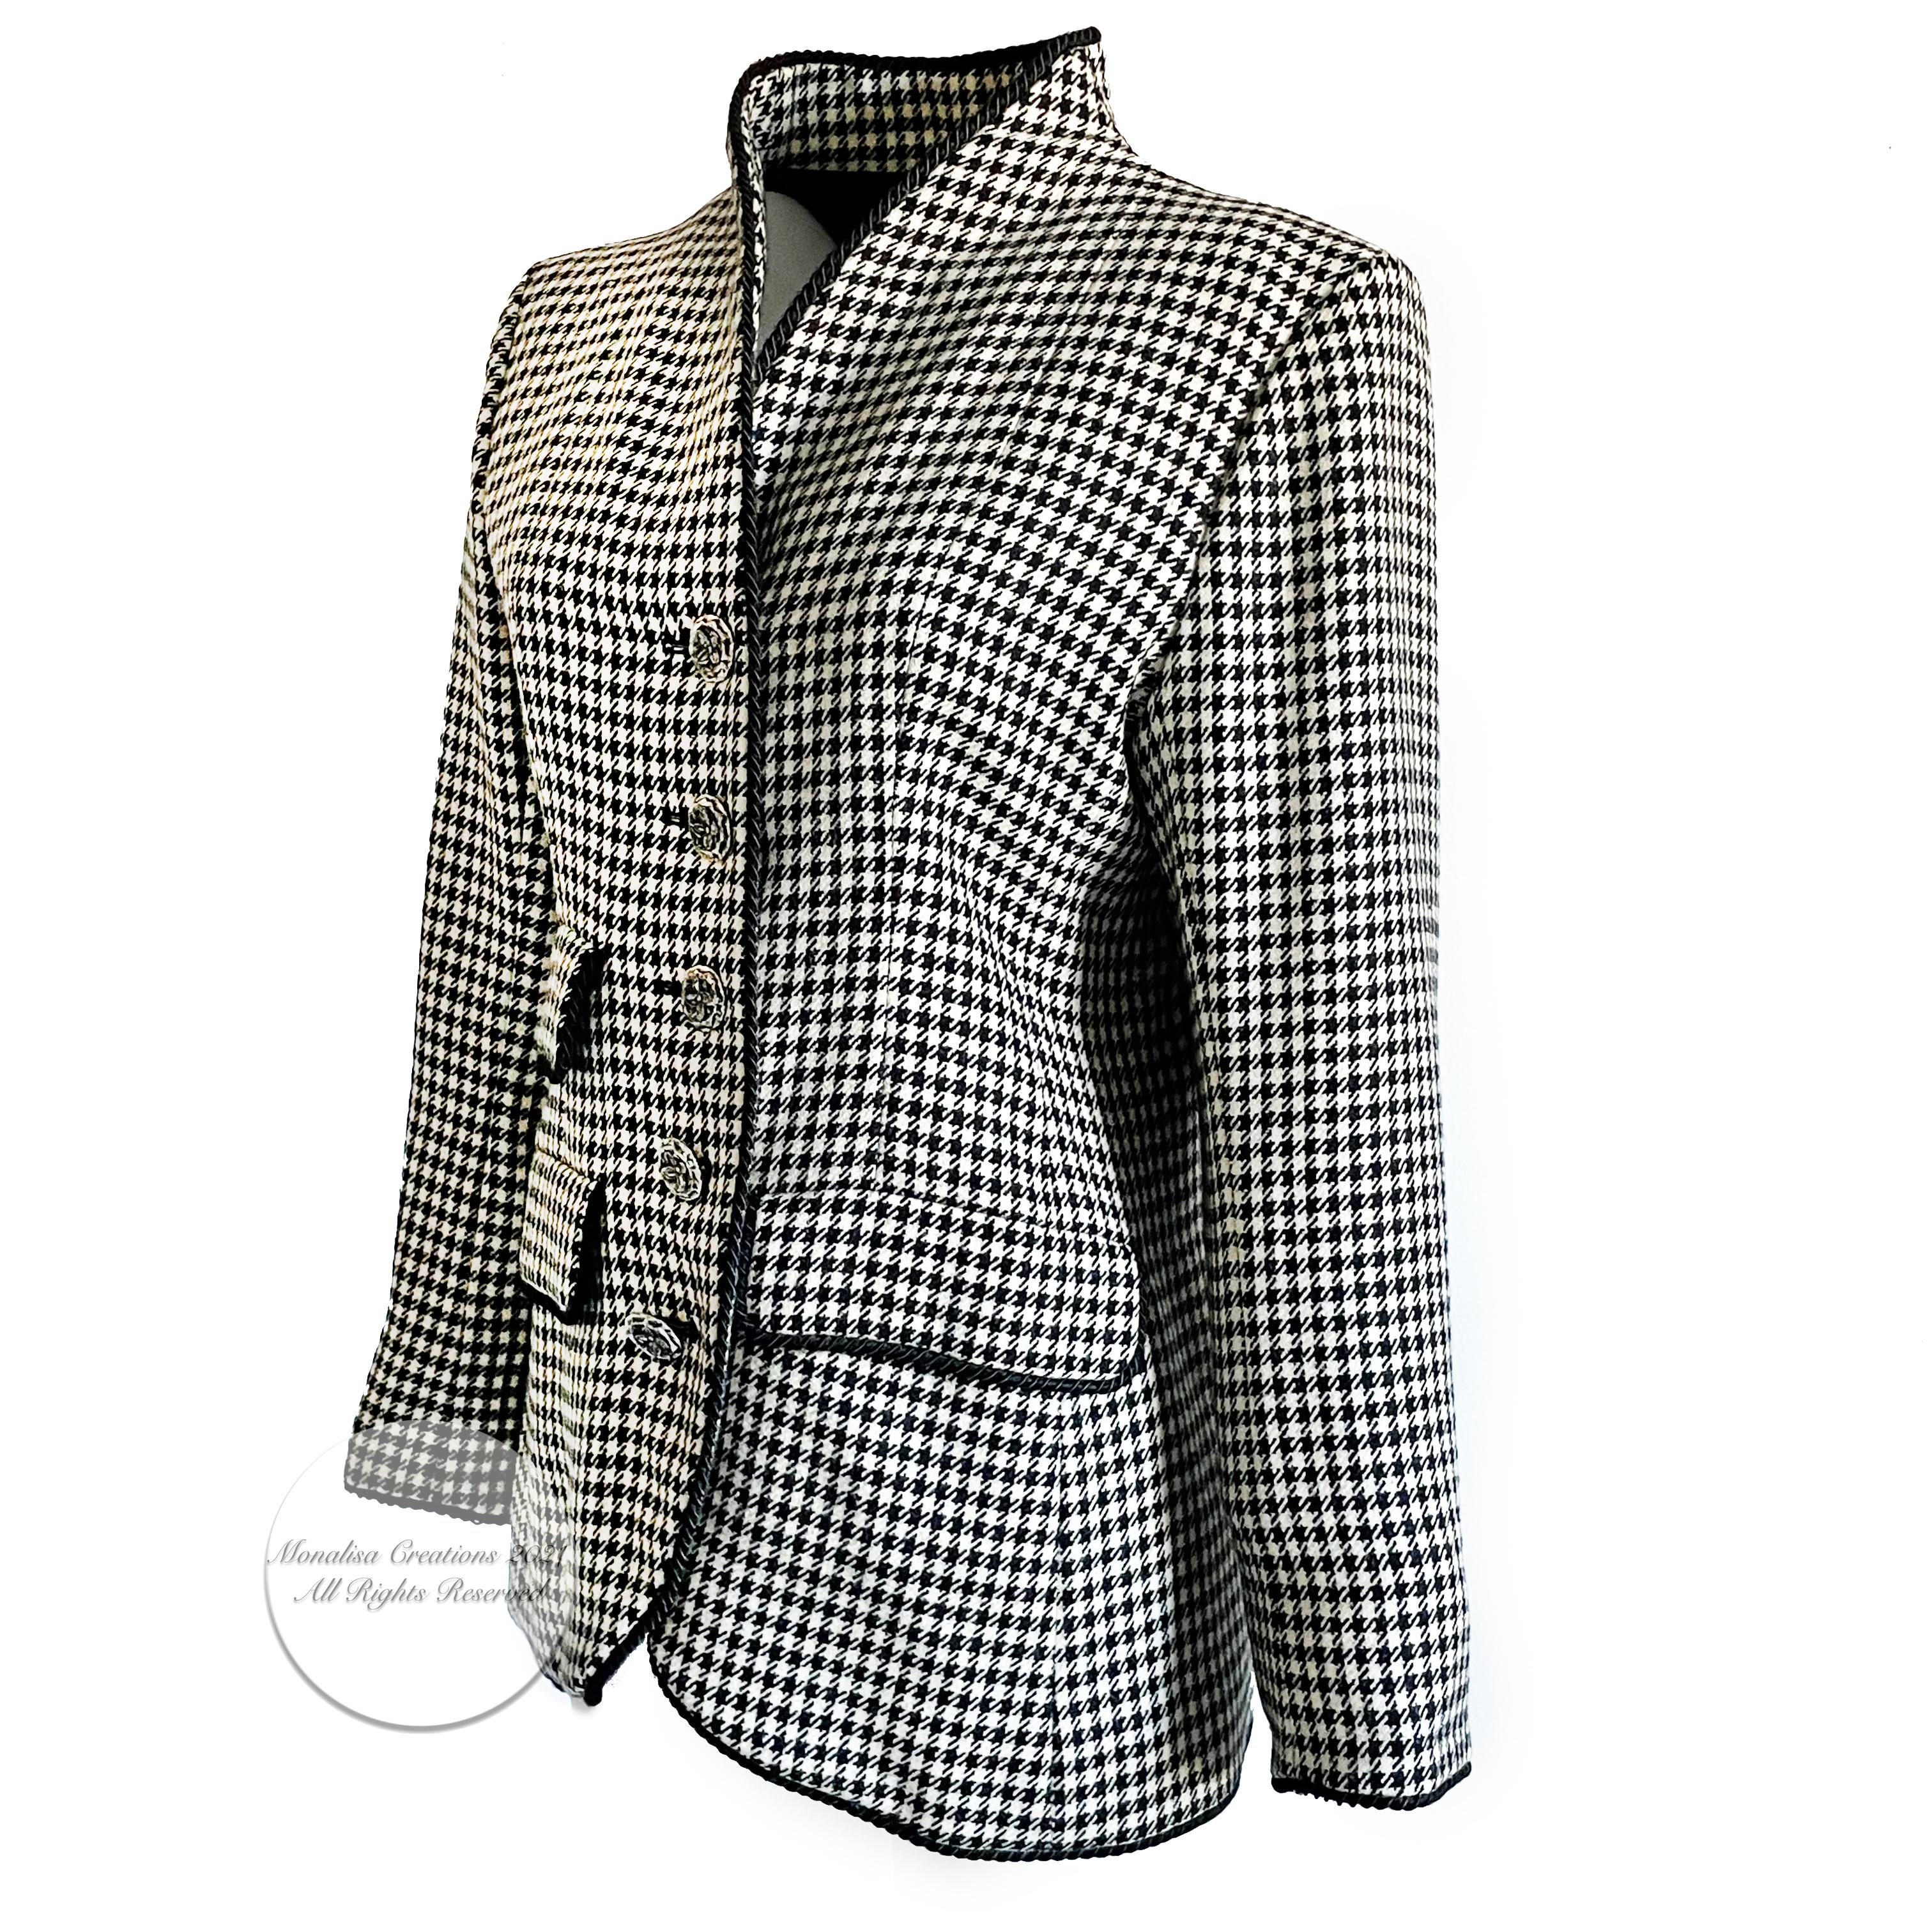 Yves Saint Laurent Jacket Houndstooth Wool Black Rope Trim Floral Buttons Sz 40 3